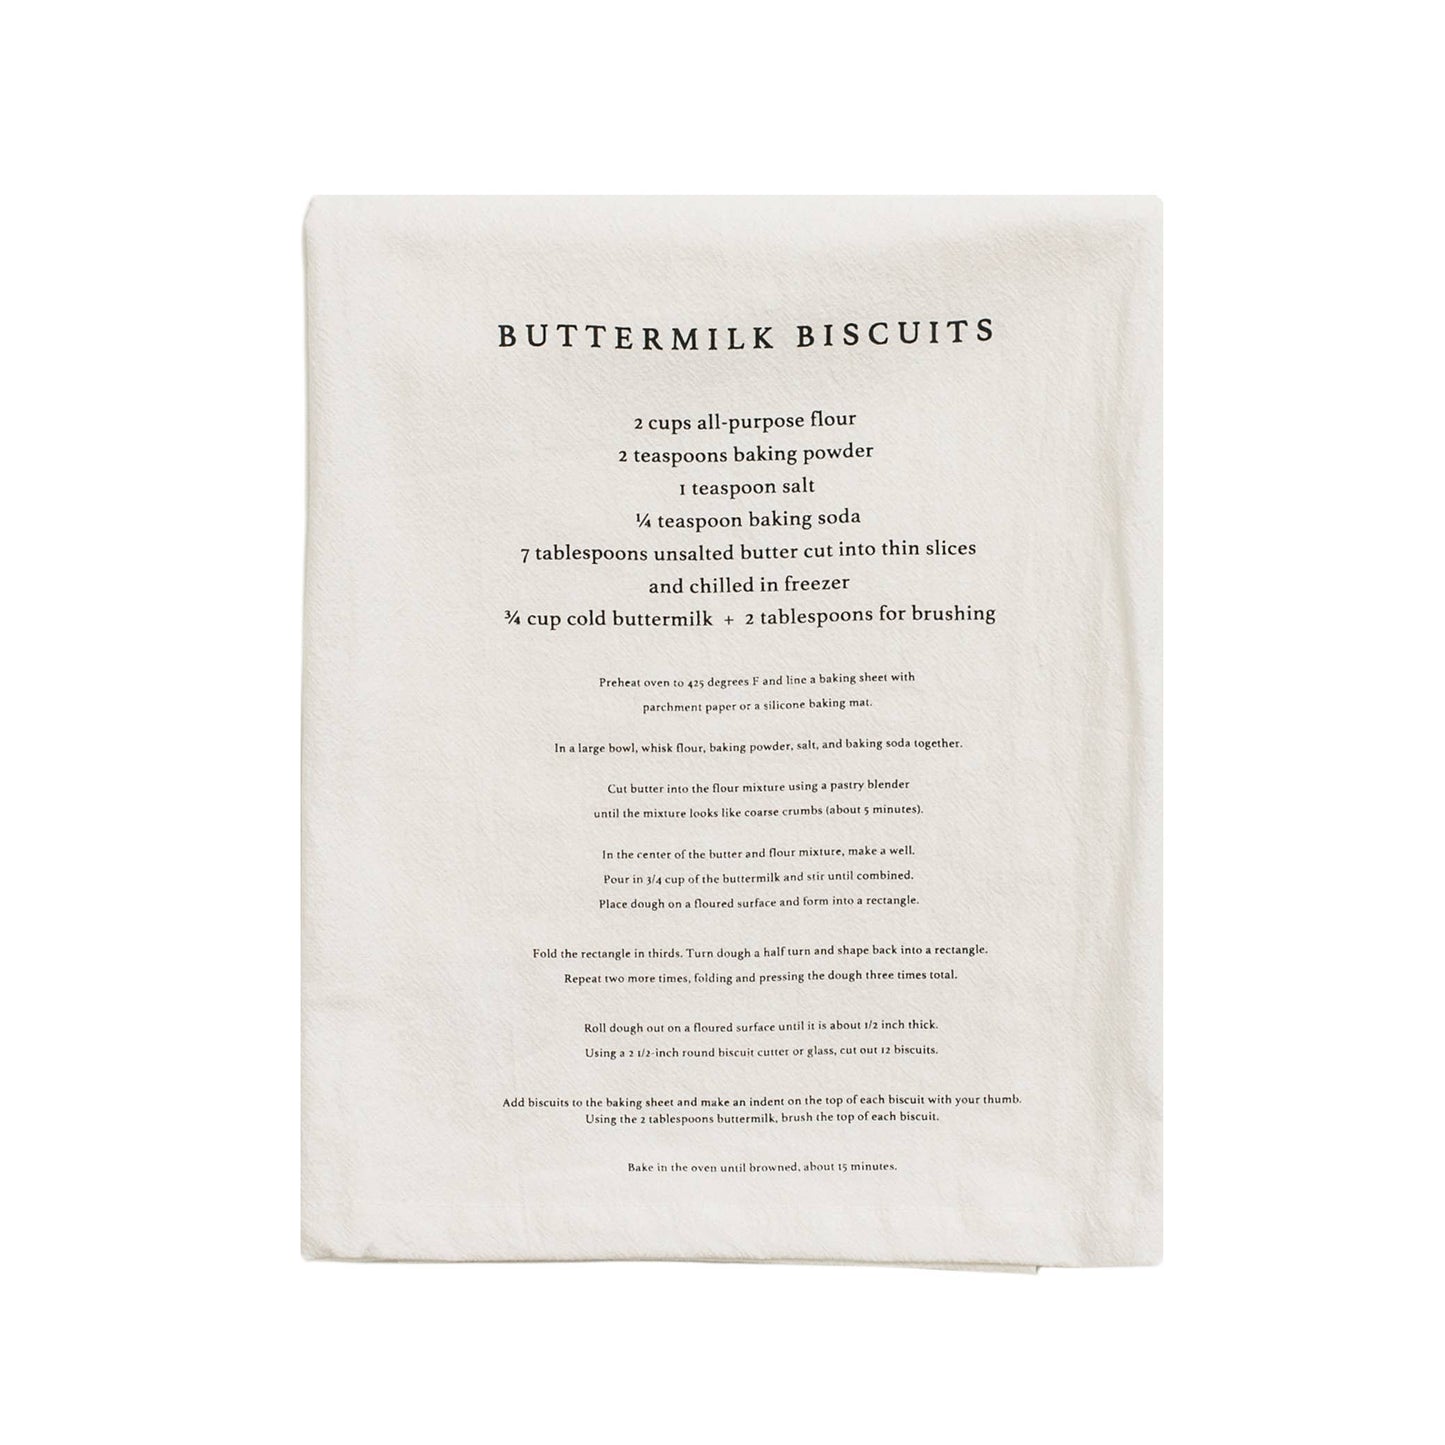 Buttermilk Biscuits Tea Towel - Home Decor & Gifts